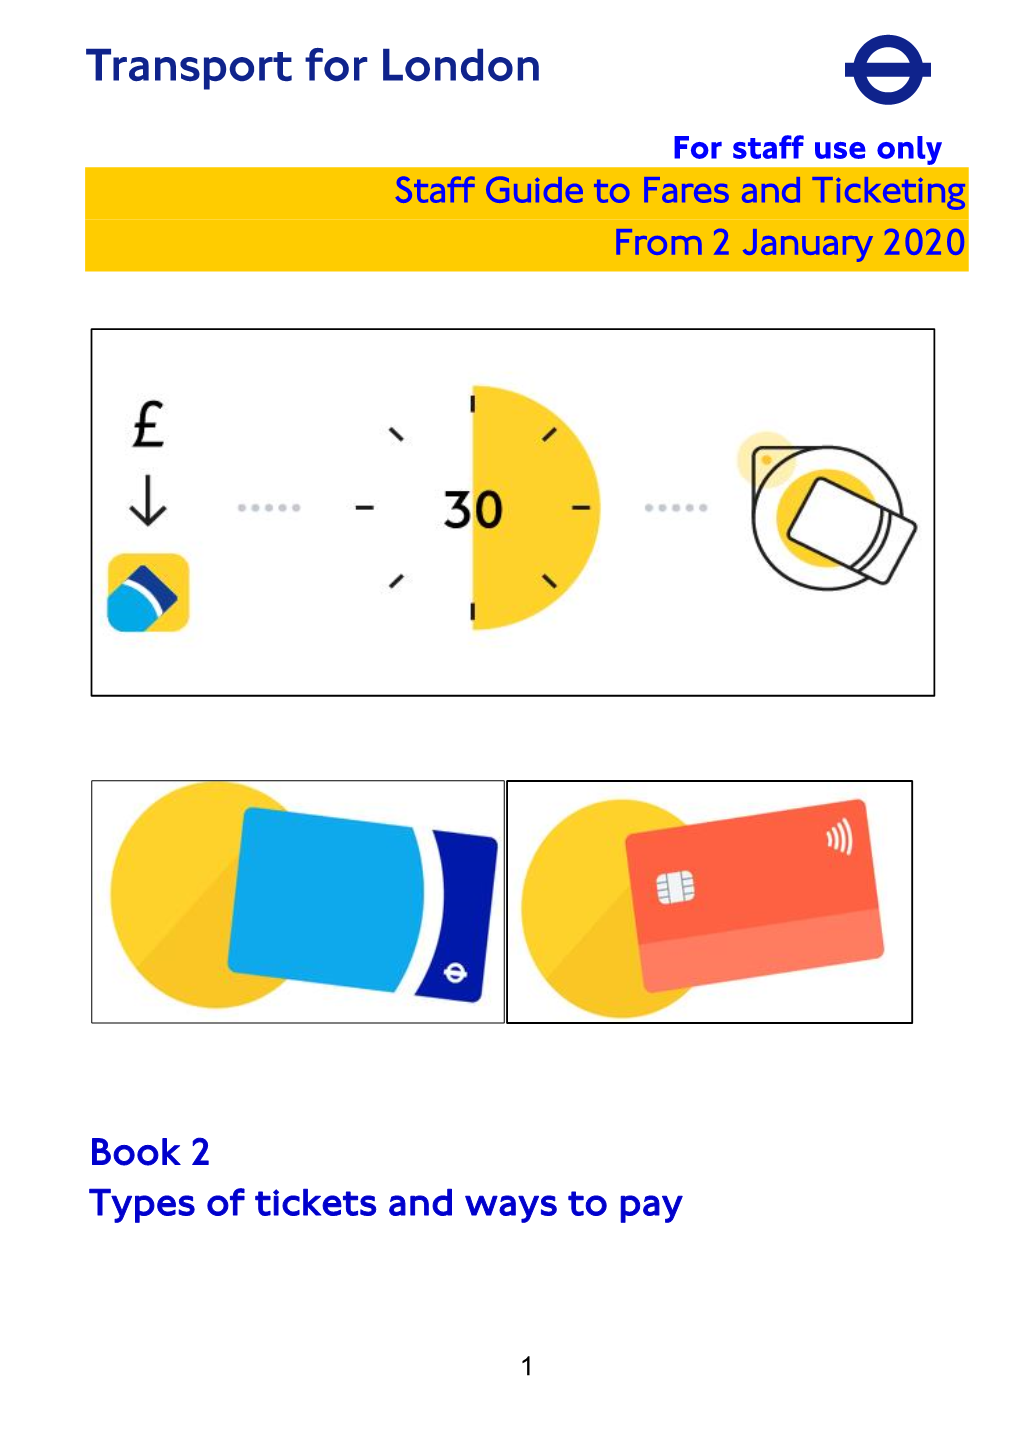 Staff Guide to Fares and Ticketing from 2 January 2020 Book 2 Types